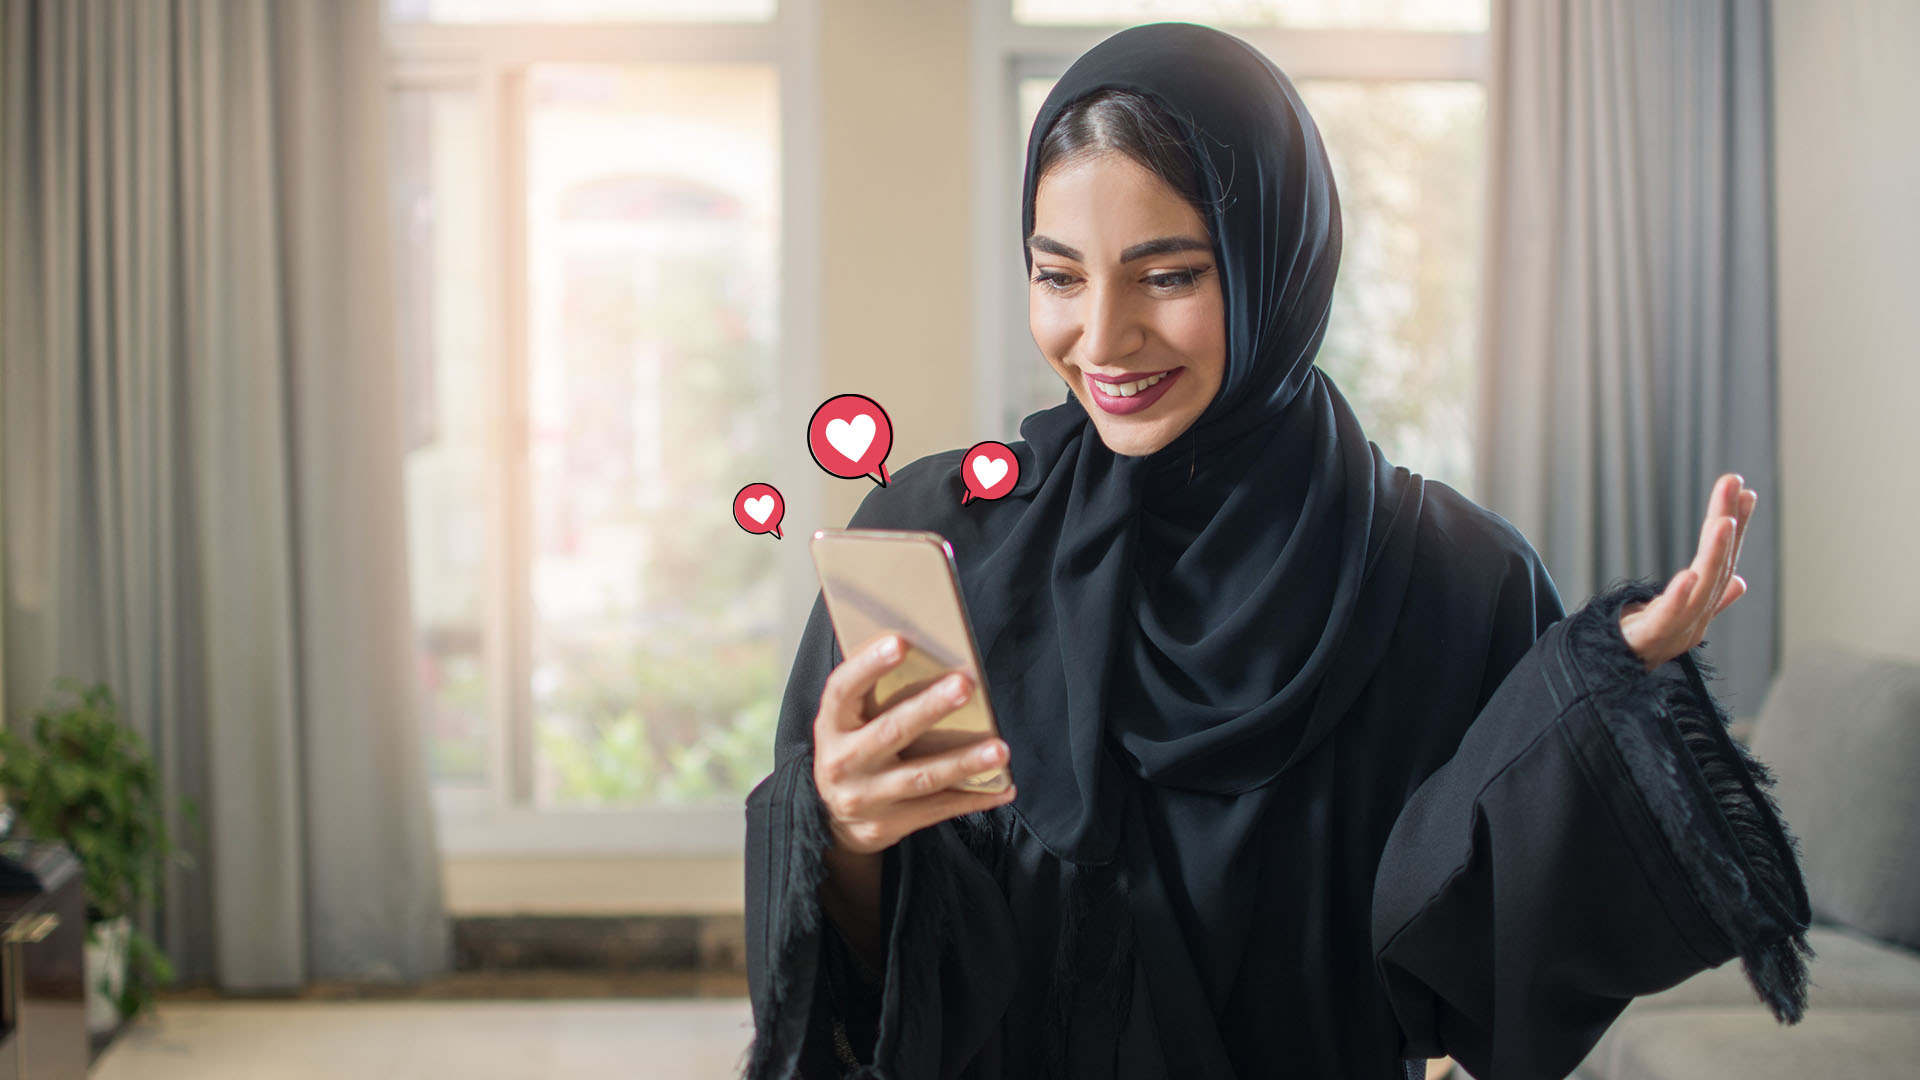 Woman dressed in black with black hijab, holding her phone in her hand and smiling while looking at it. She is in living room